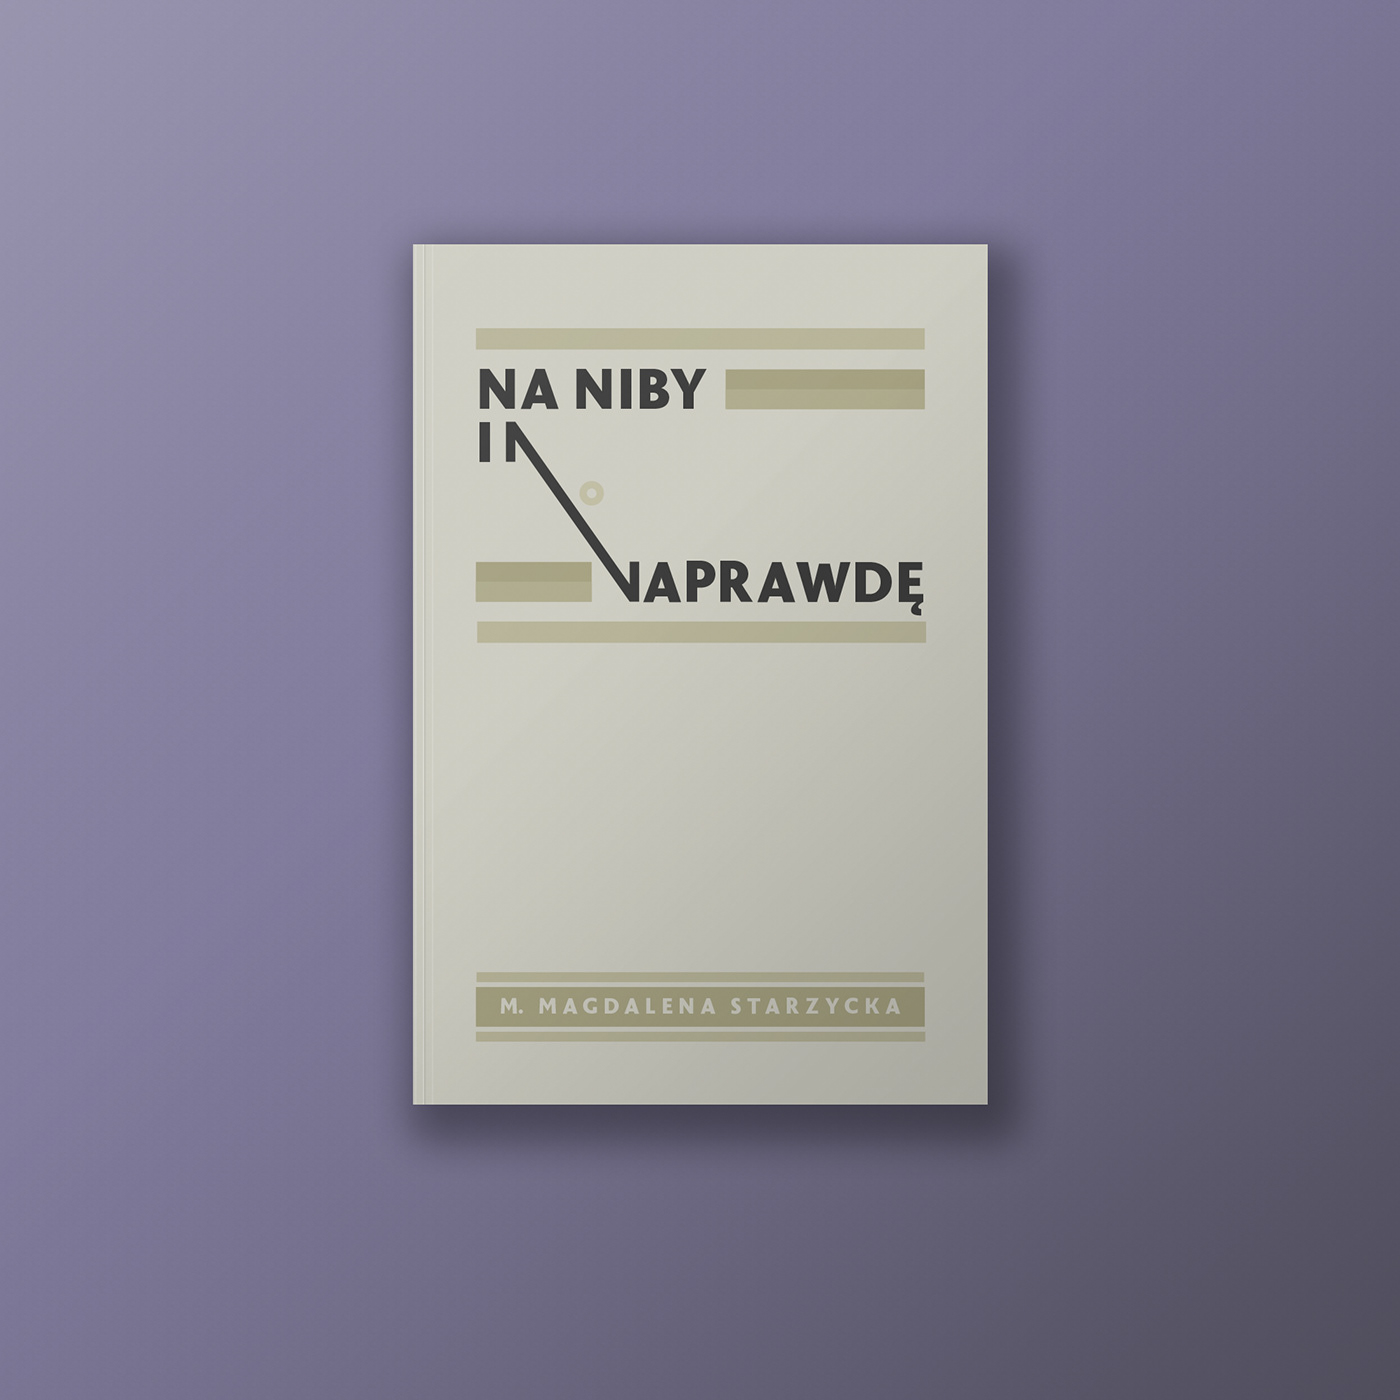 book cover book cover typography   books covers cracow lodz Poetry 